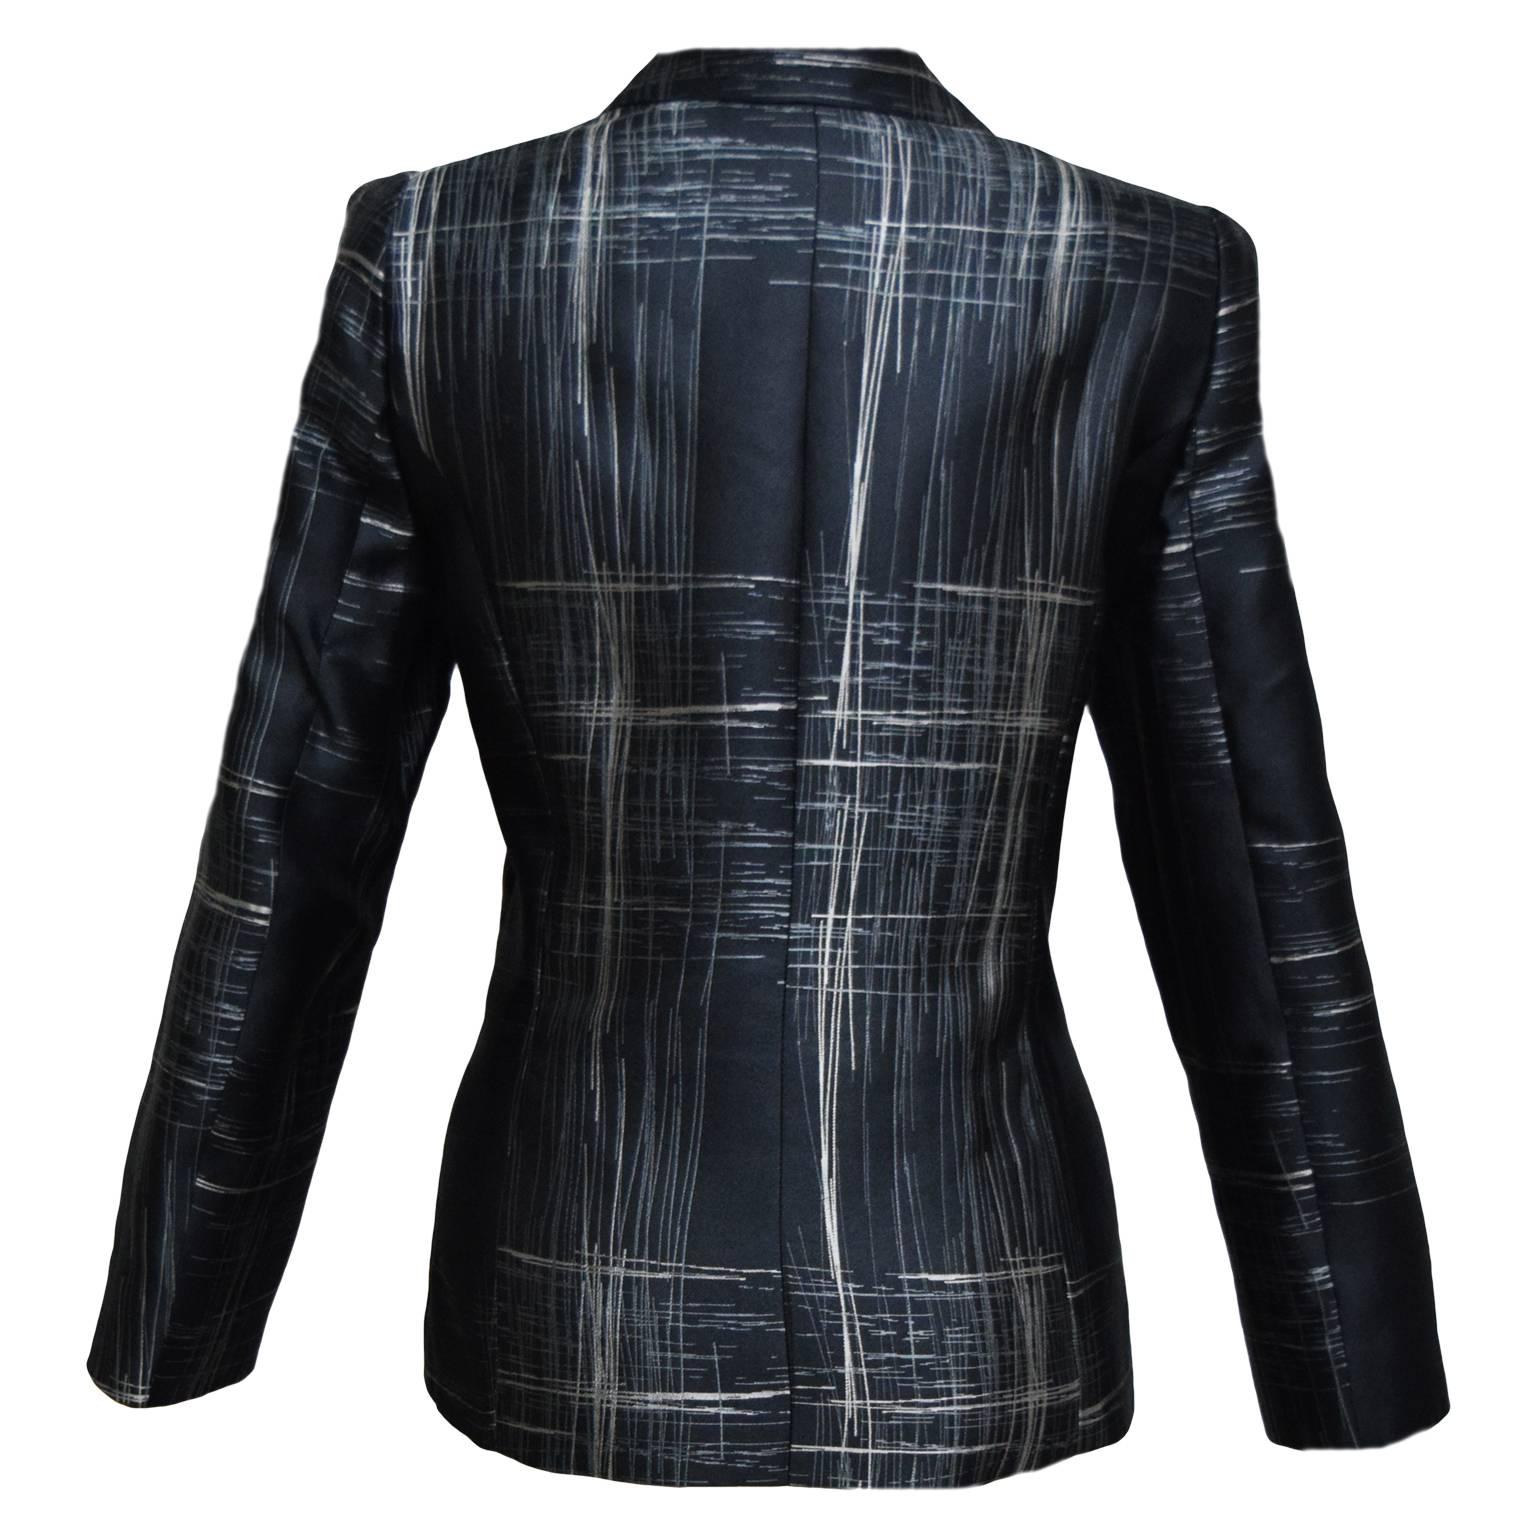 This amazing sophisticated Armani blazer is made from 100% silk with black, grey, and iridescent white, abstract striped print. It is single breasted, has pockets, darts, and is fully lined.